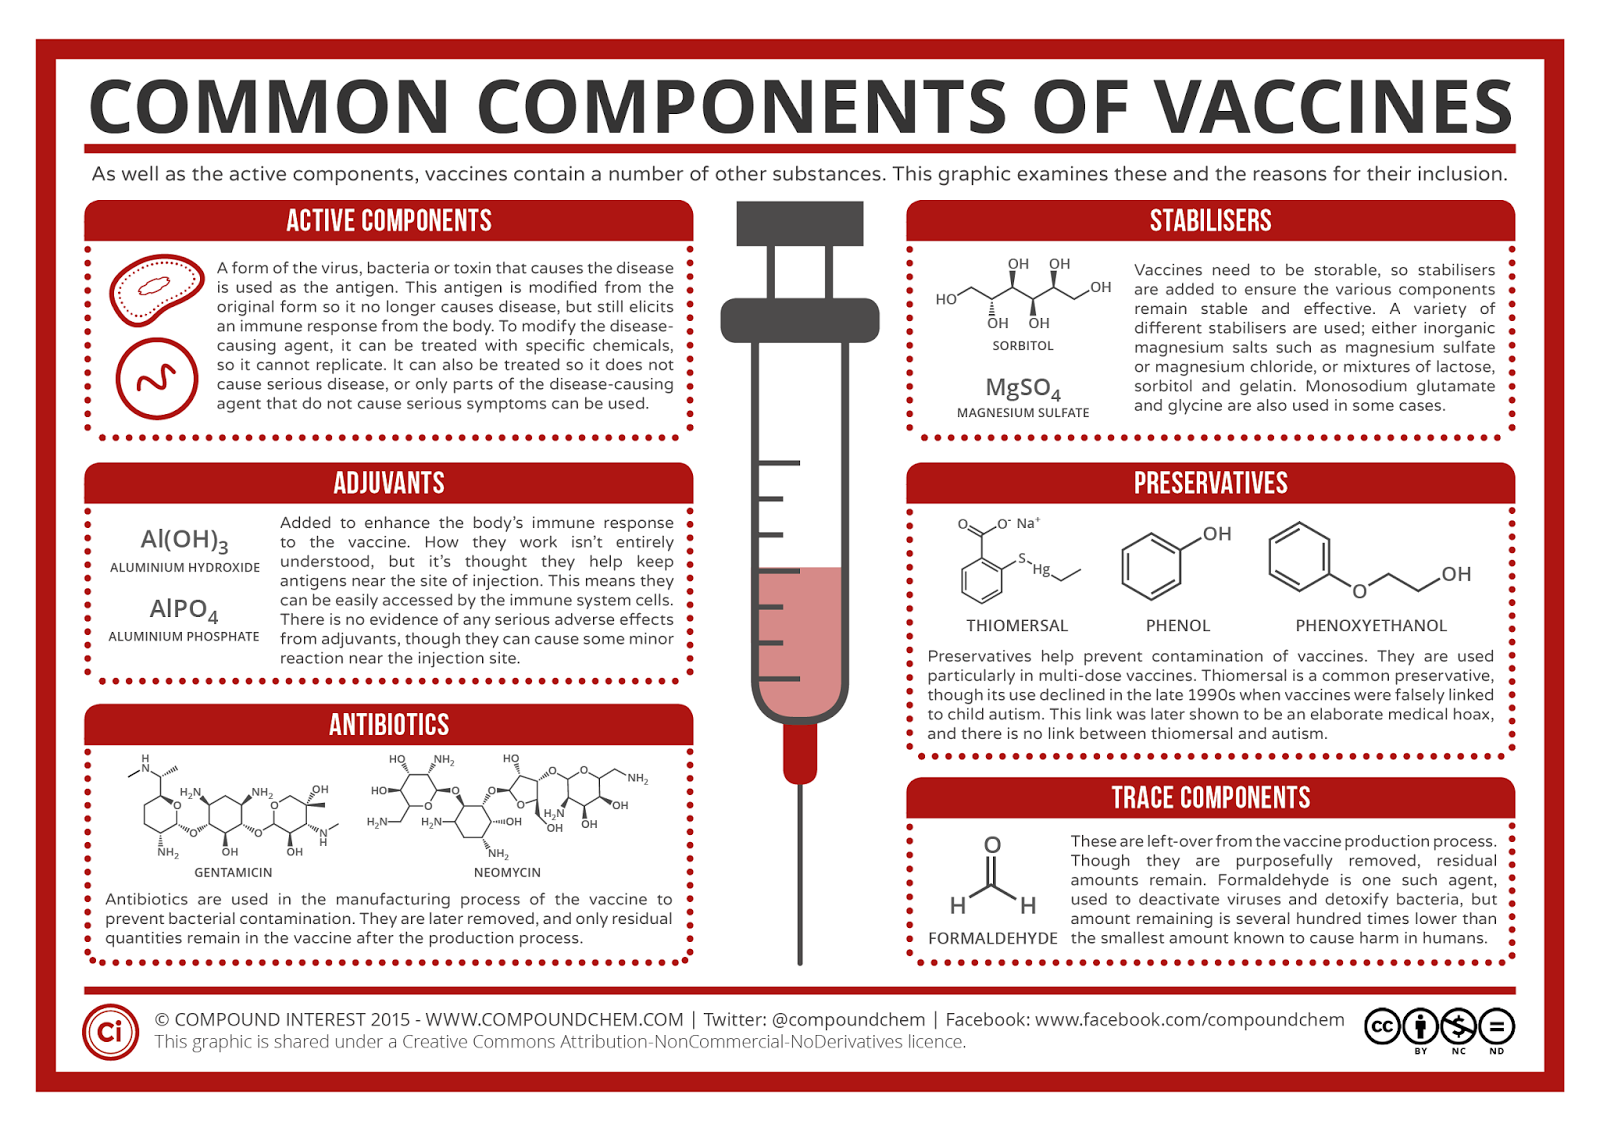 http://www.compoundchem.com/wp-content/uploads/2015/02/Medicinal-Chemistry-Common-Components-of-Vaccines-Summary.png